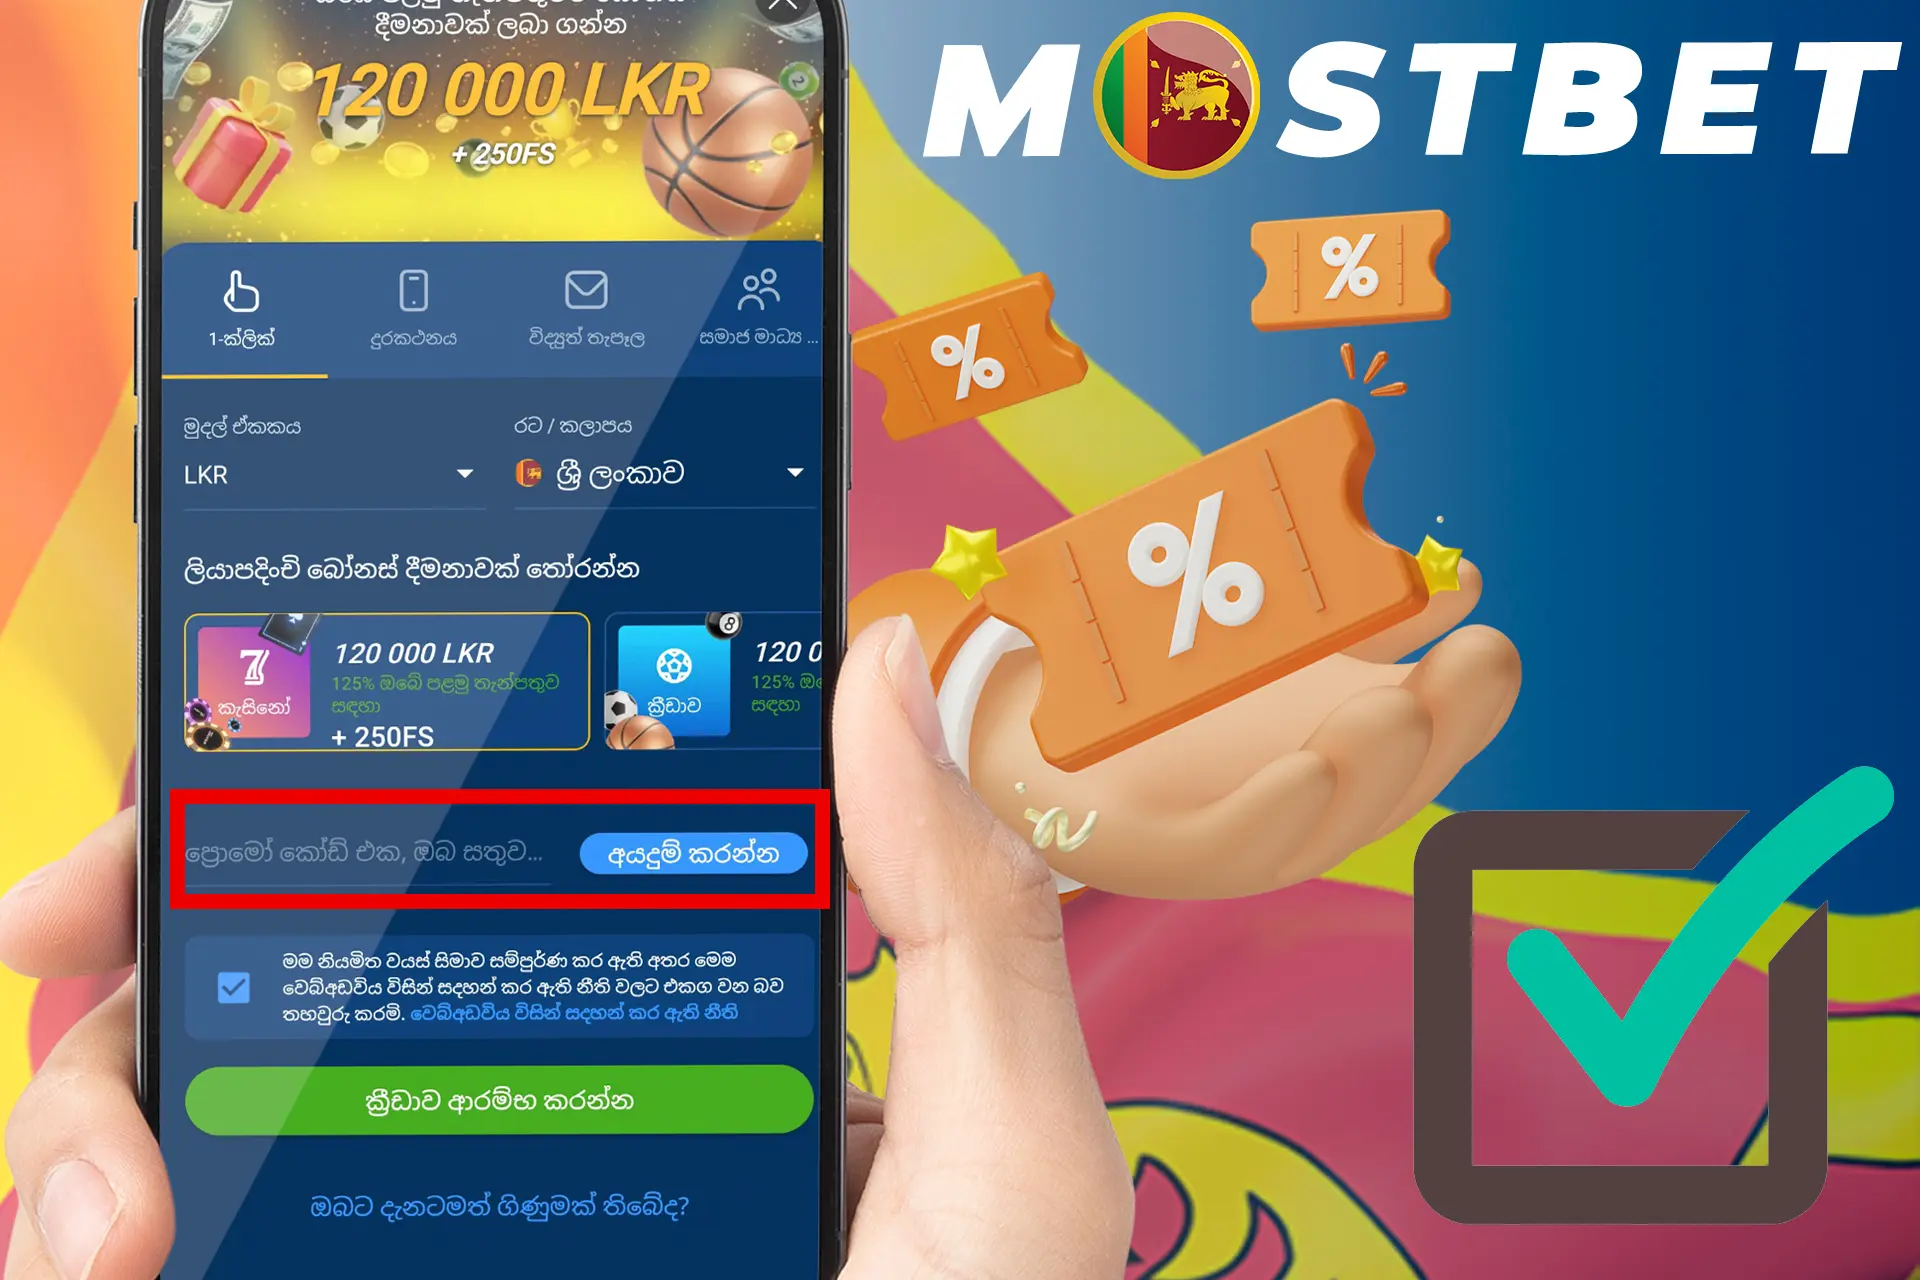 Register and use the promotional code at Mostbet Sri Lanka